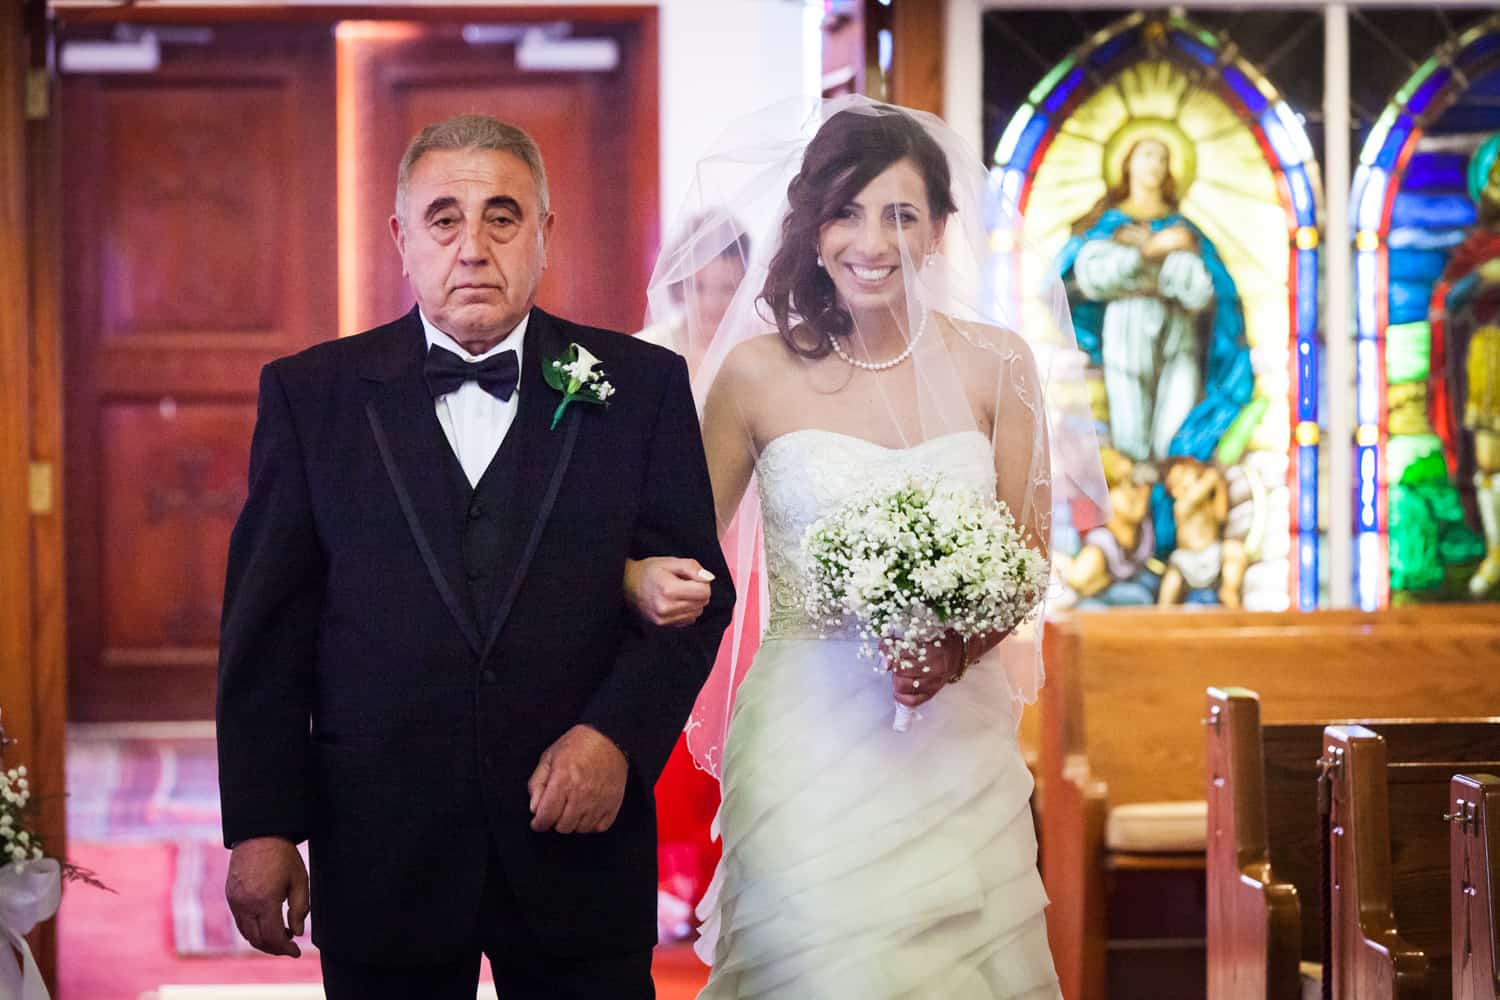 Bride and father walking down aisle in Eastern Orthodox wedding ceremony